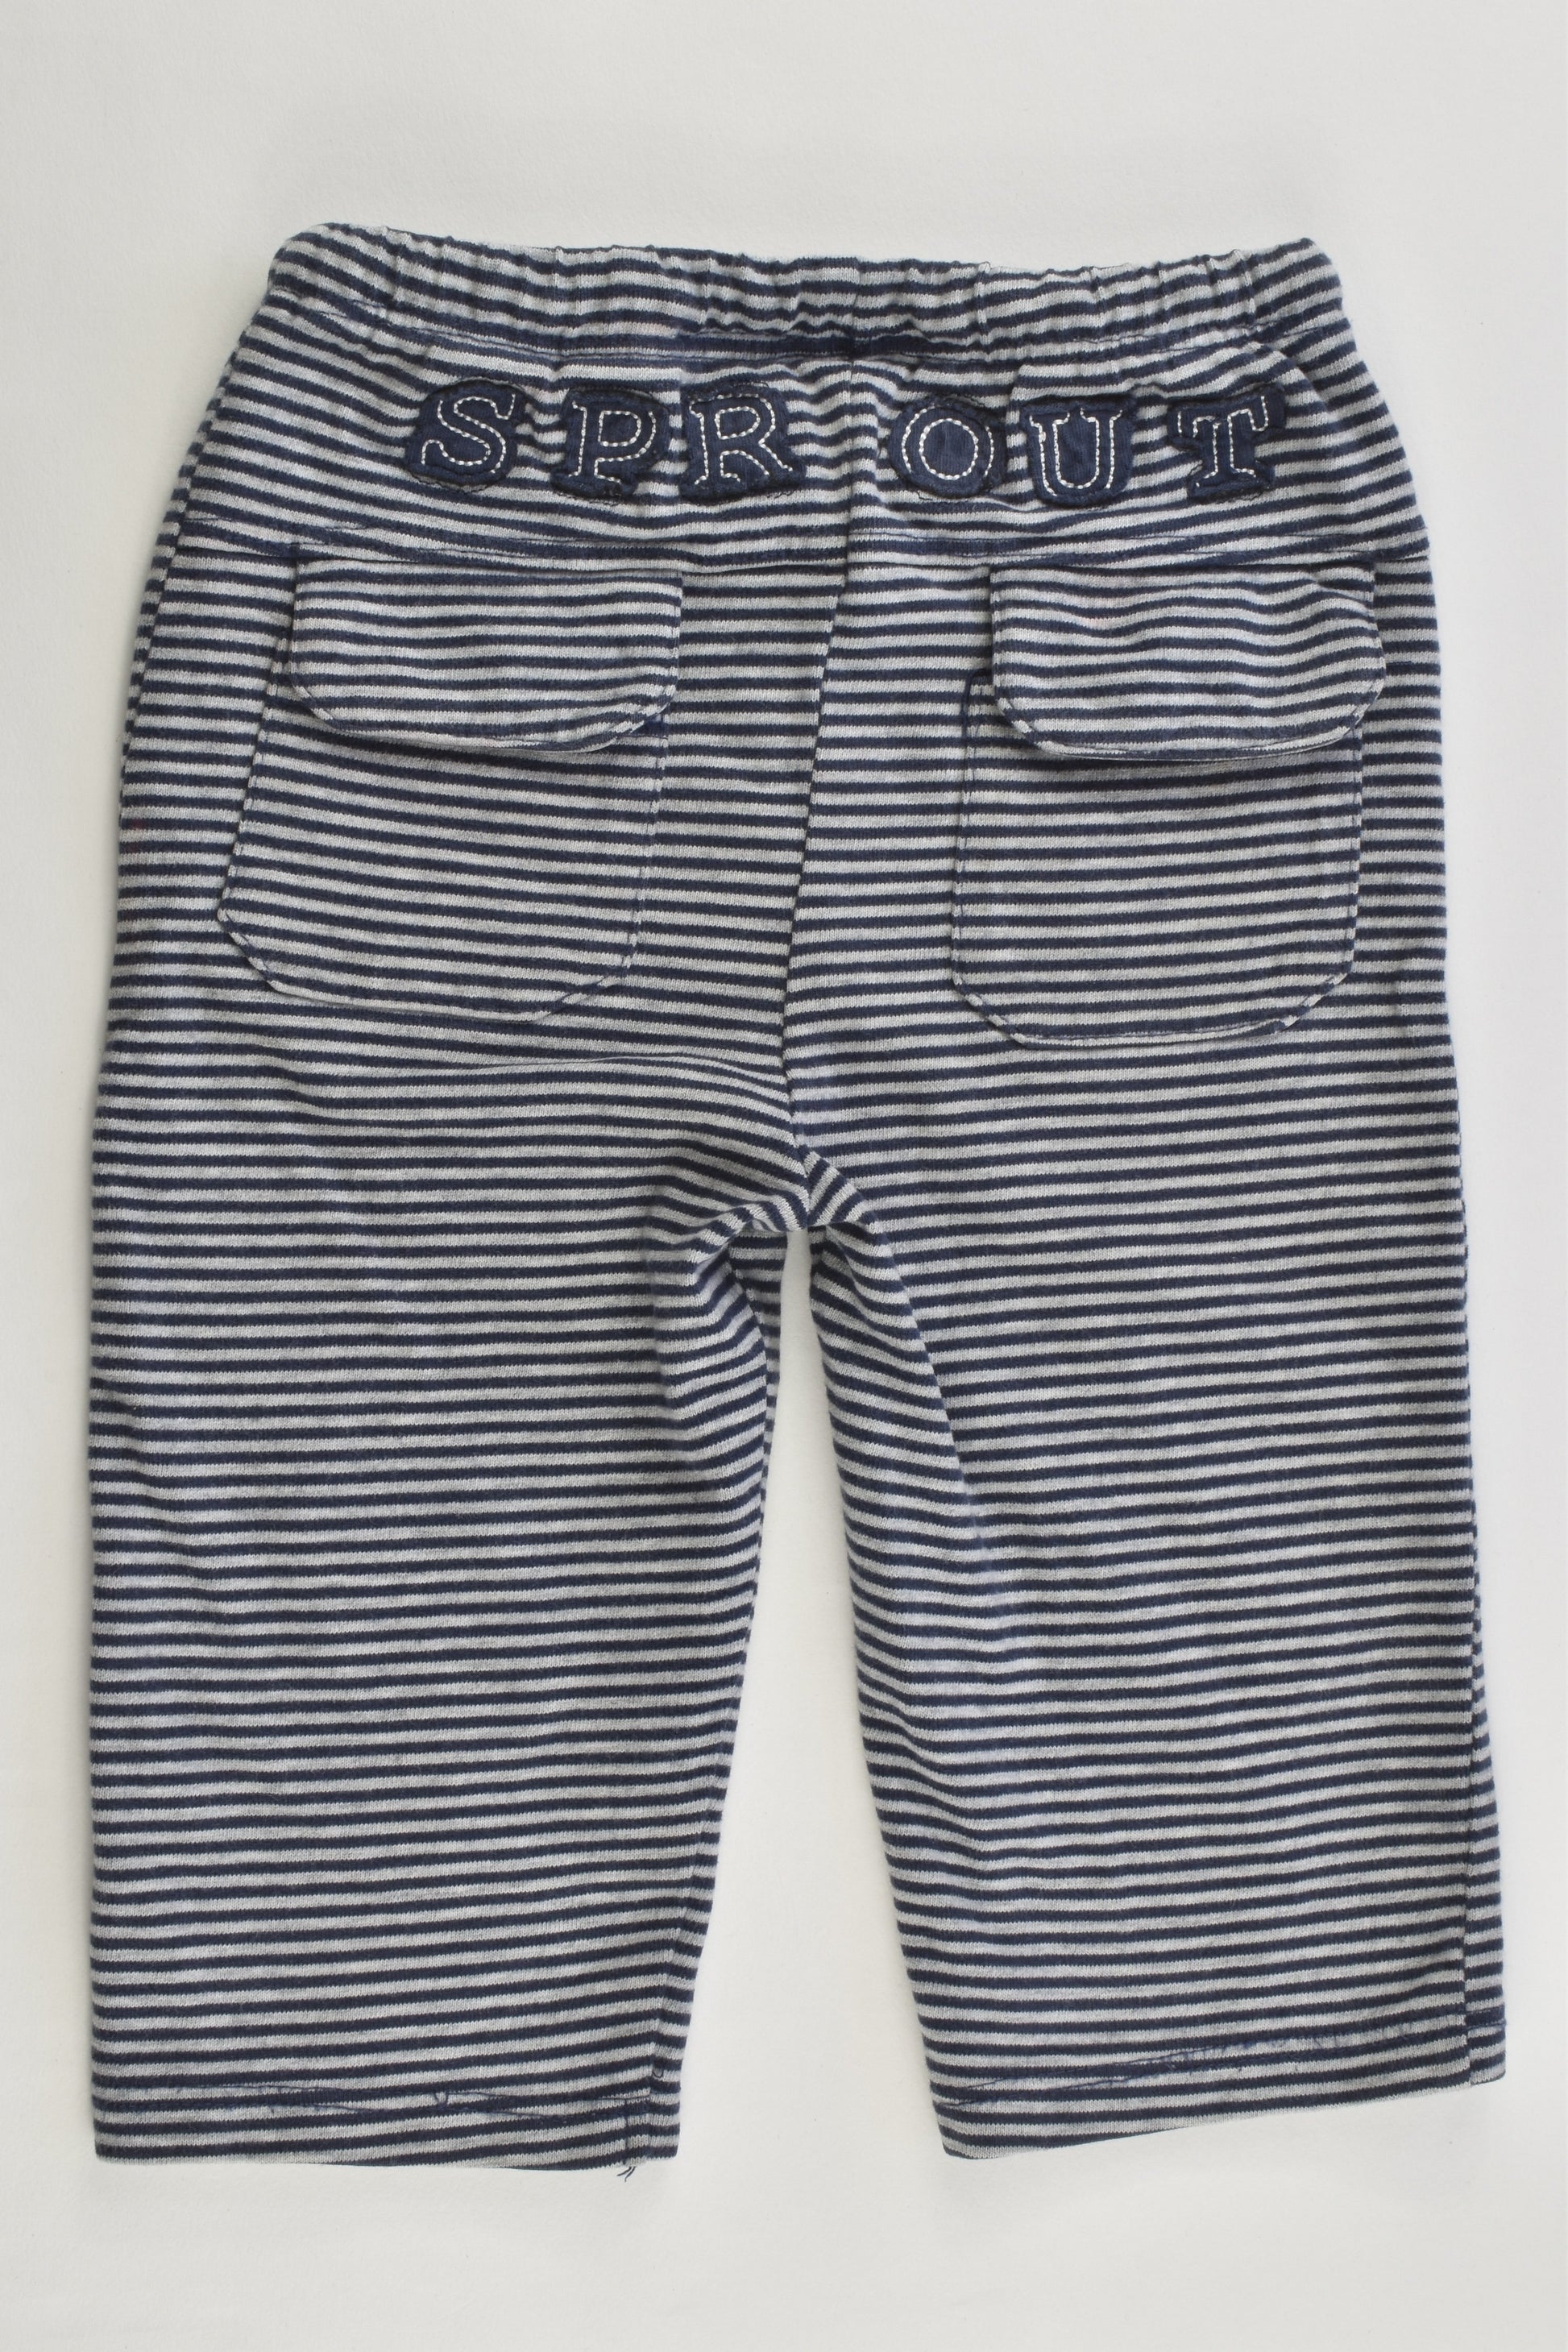 Sprout Size 00 Striped Pants